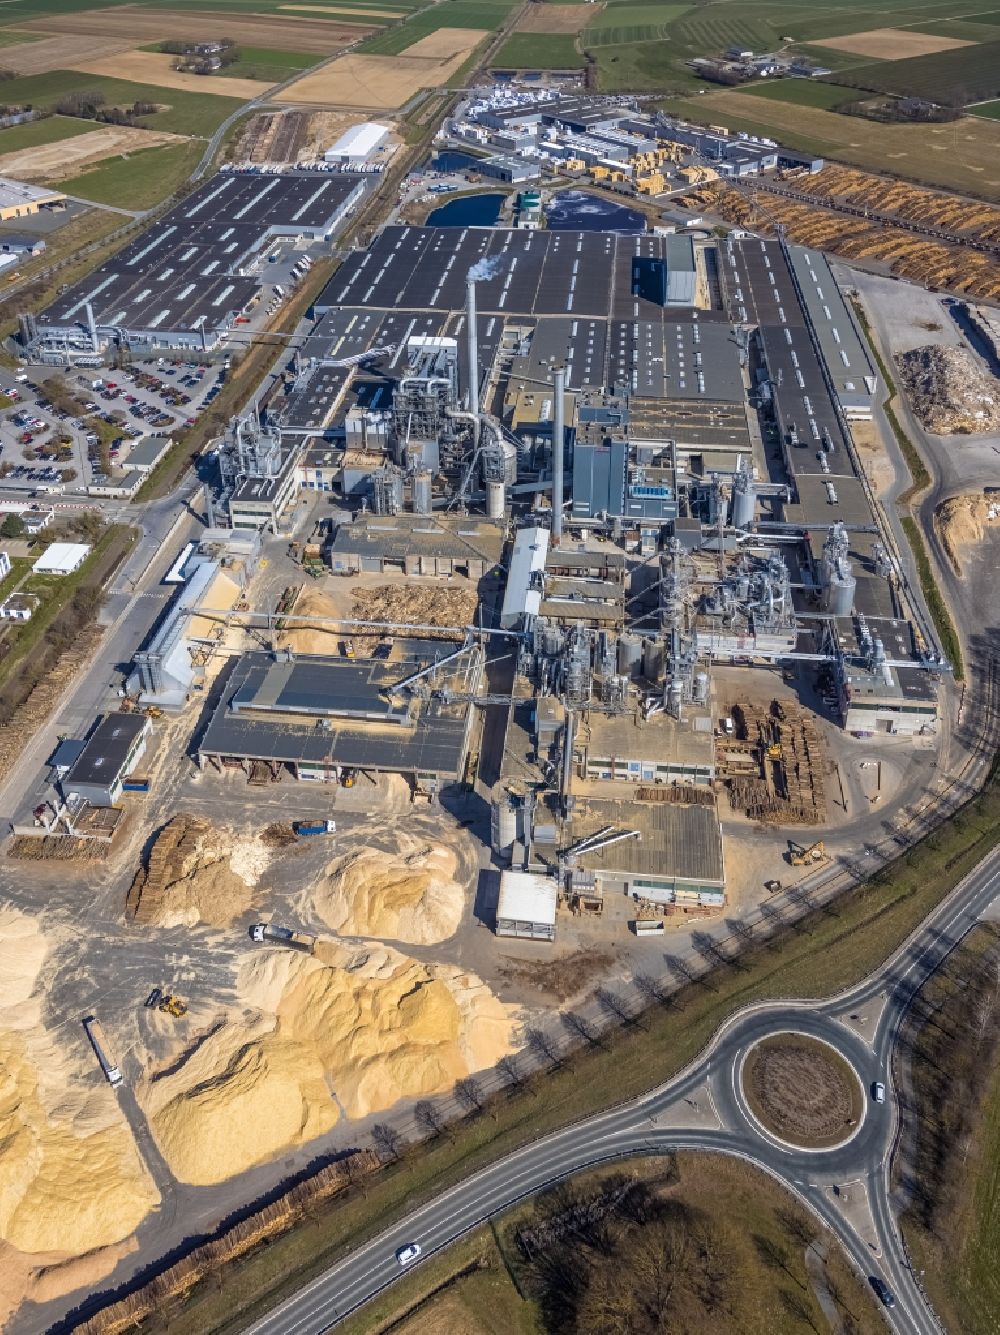 Brilon from the bird's eye view: Company grounds and facilities of of EGGER Holzwerkstoffe Brilon GmbH & Co. KG in Brilon at Ruhrgebiet in the state North Rhine-Westphalia, Germany